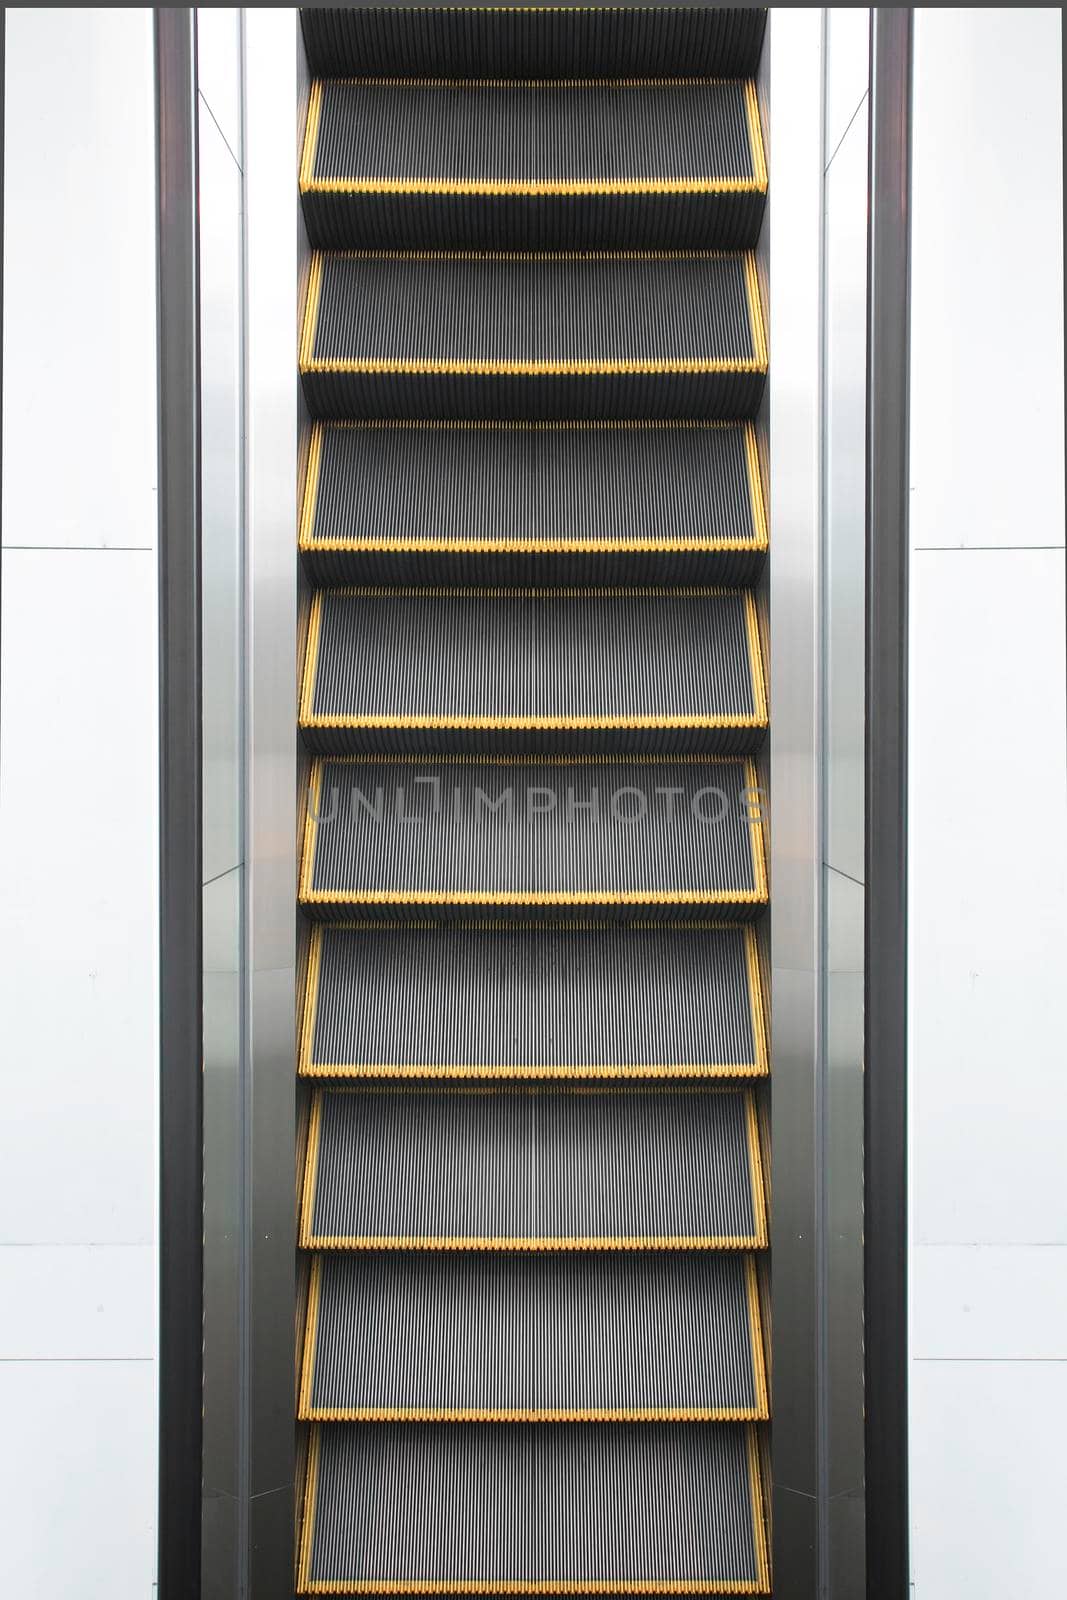 Escalator up in the mall